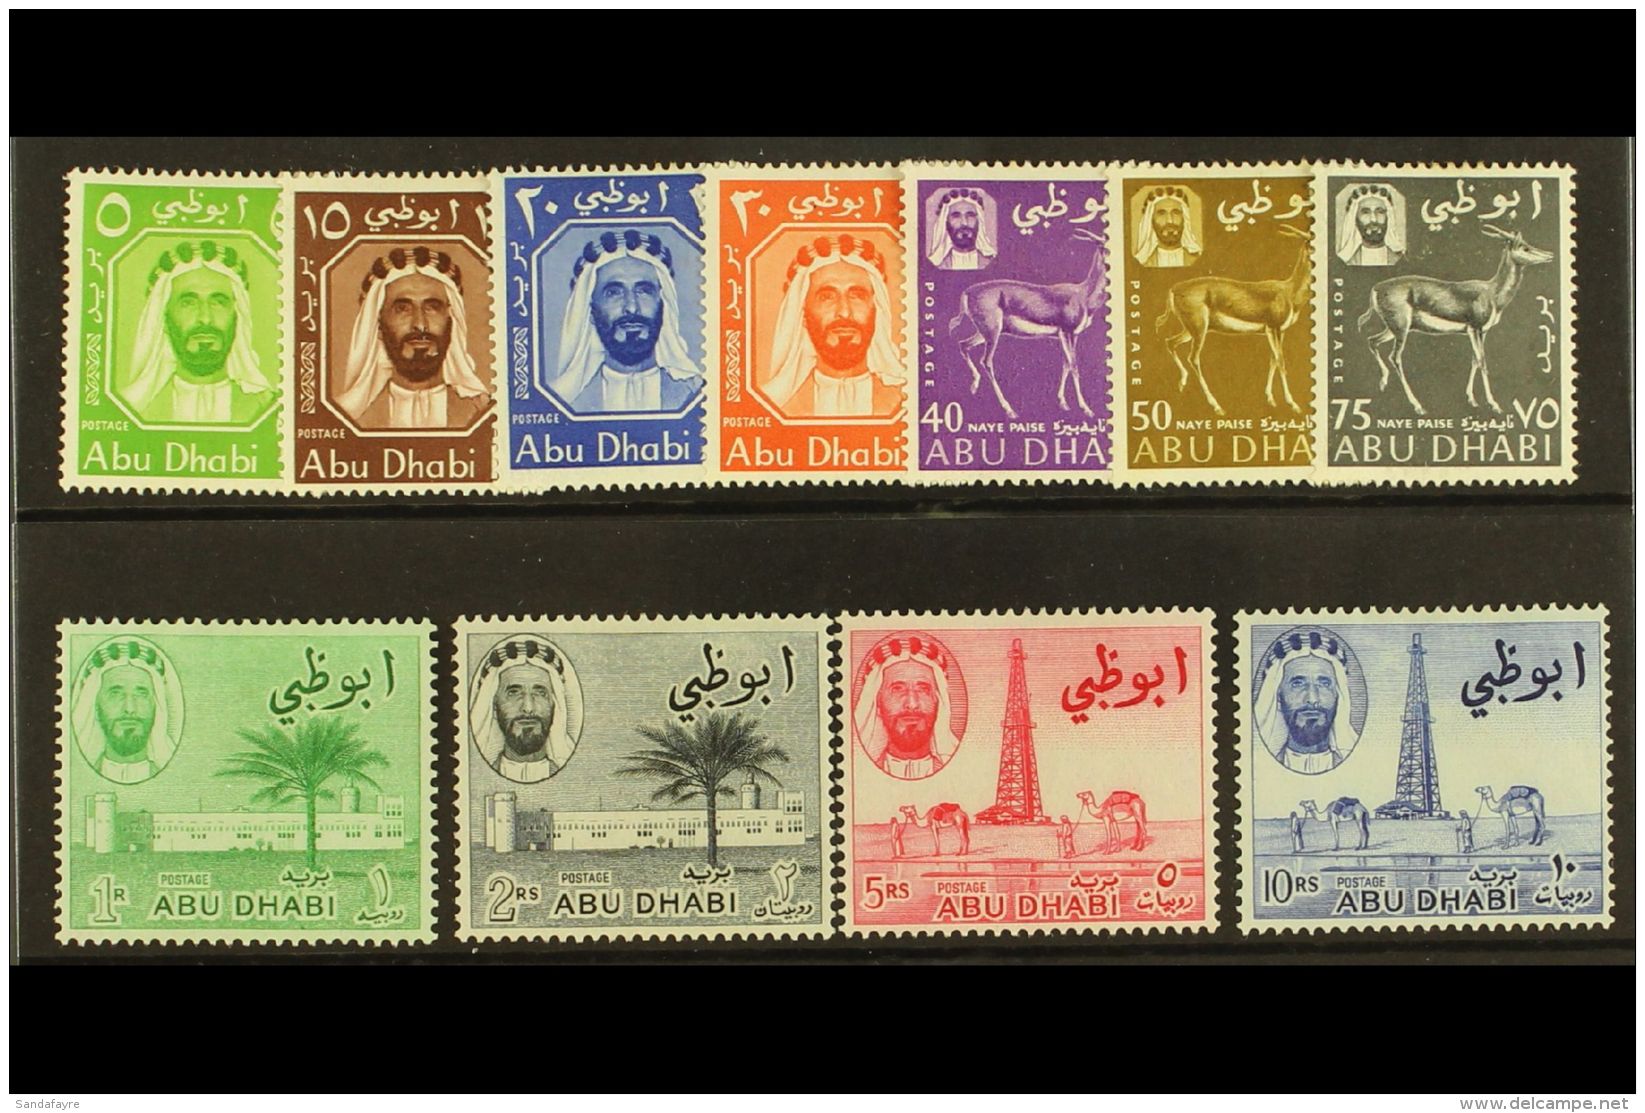 1964 Oil Rig And Camels Set Complete, SG 1/11, Fine And Fresh Mint. (11 Stamps) For More Images, Please Visit... - Abu Dhabi